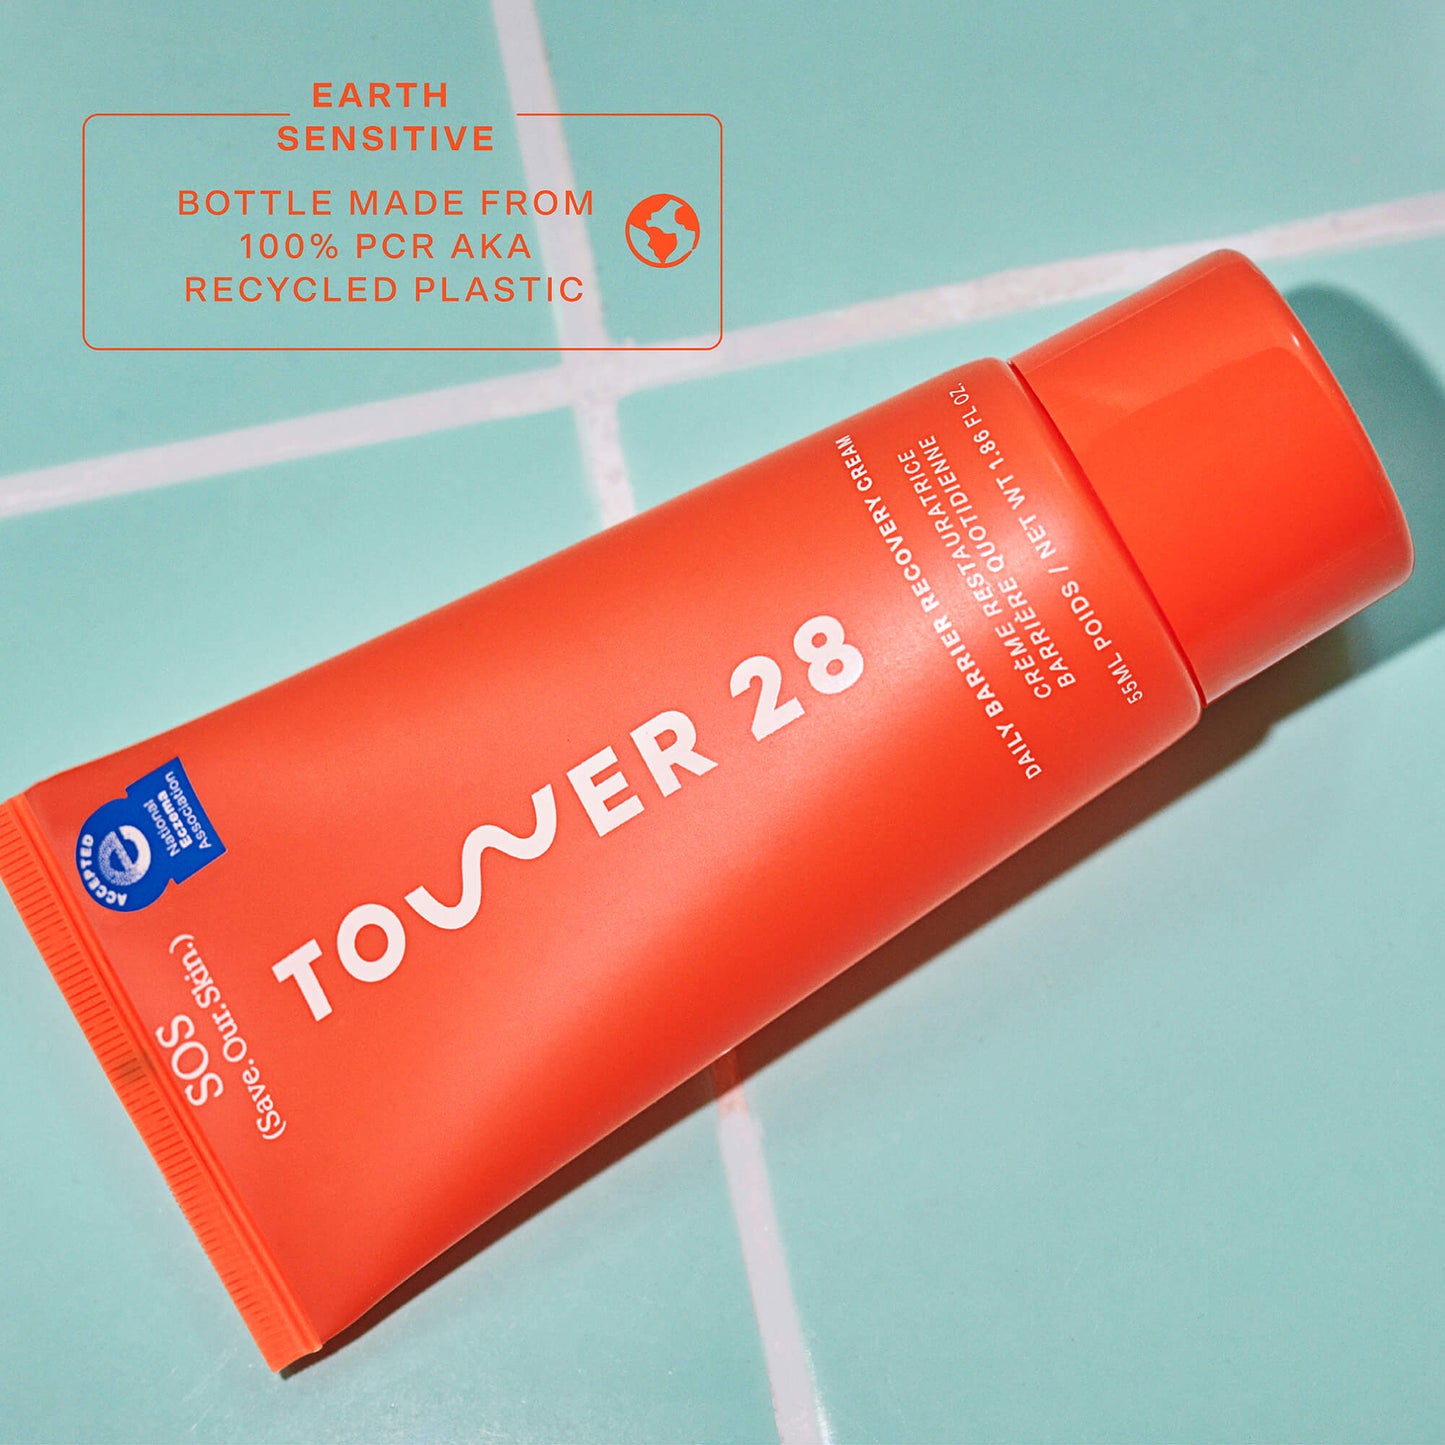 [Shared: Tower 28 Beauty SOS Recovery Cream bottle is made from 100% PCR aka recycled plastic]